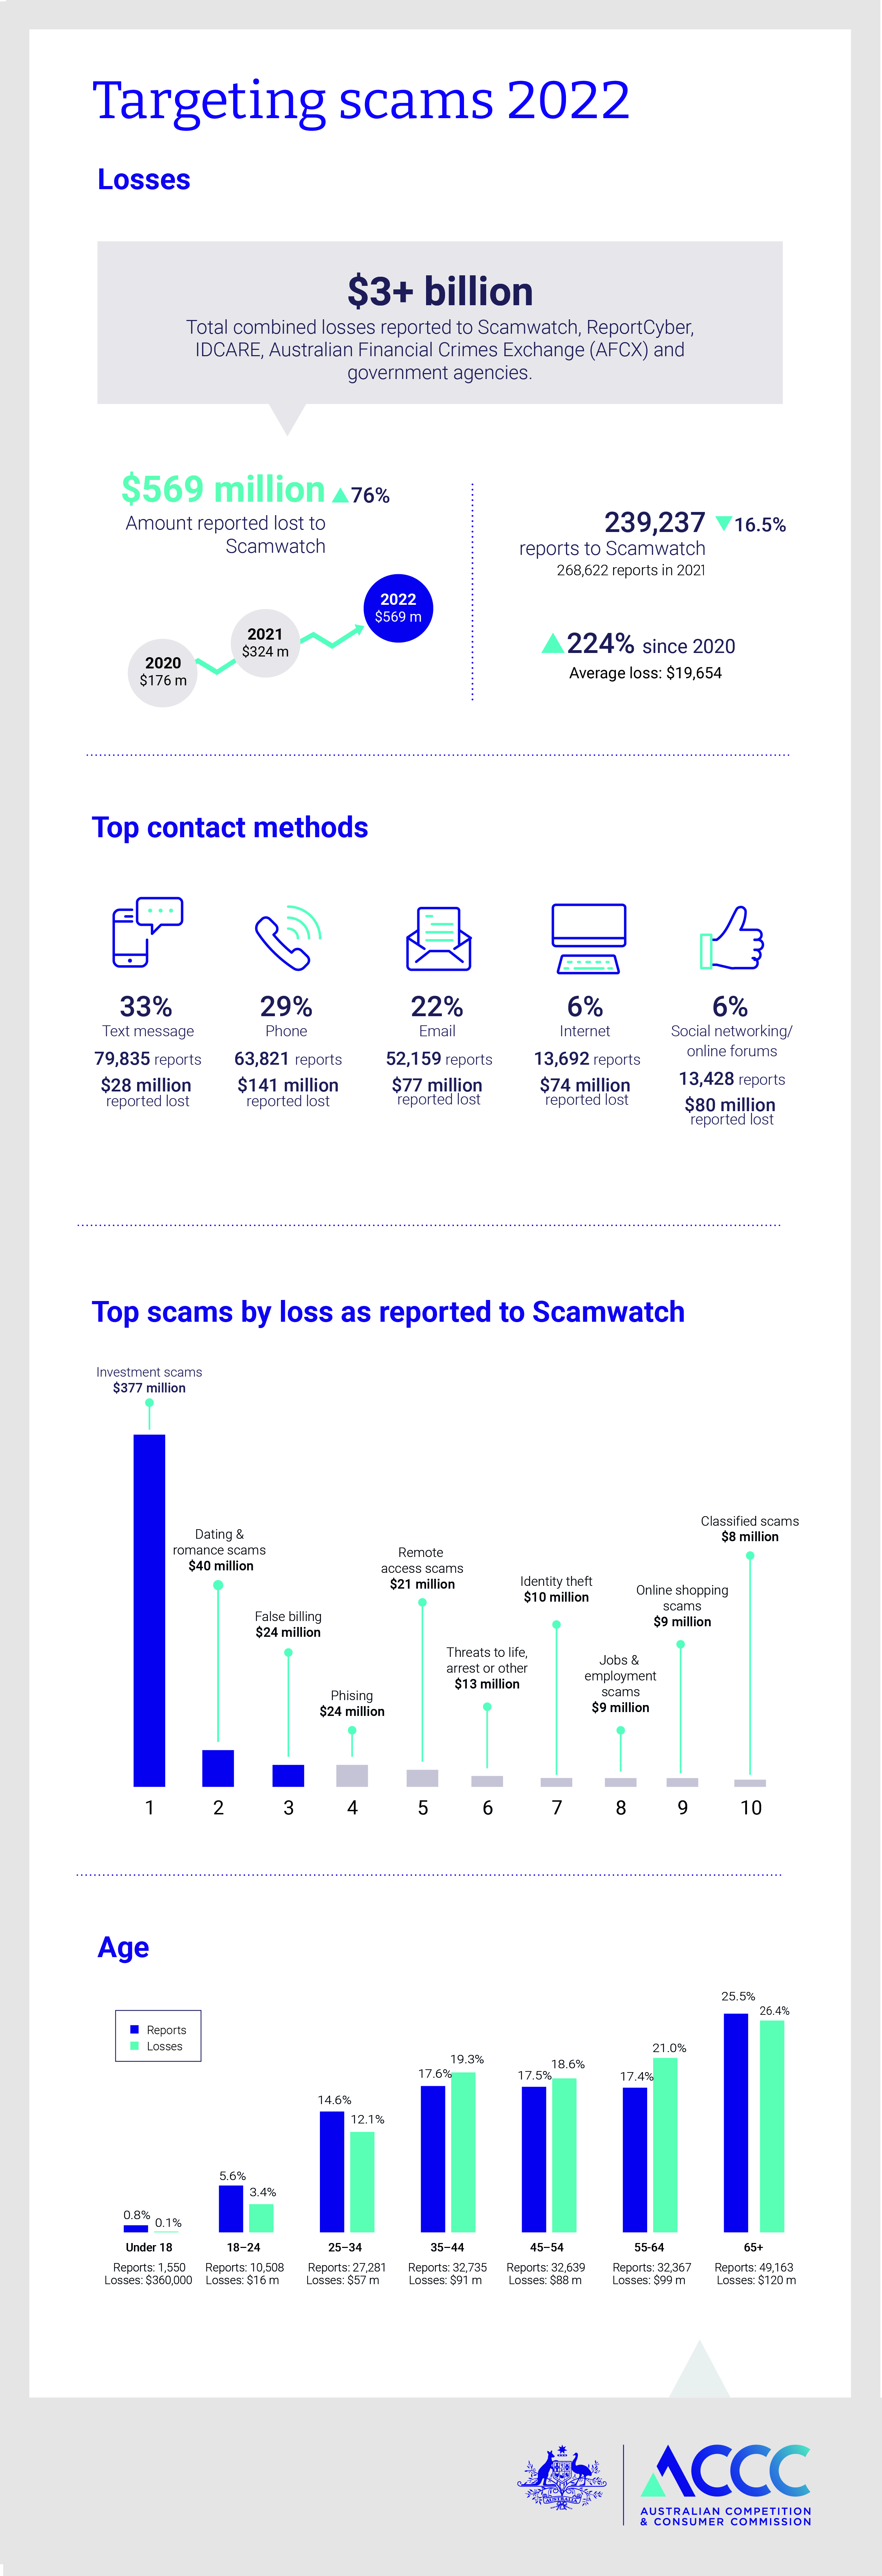 Targeting scams: report of the ACCC on scams activity 2022